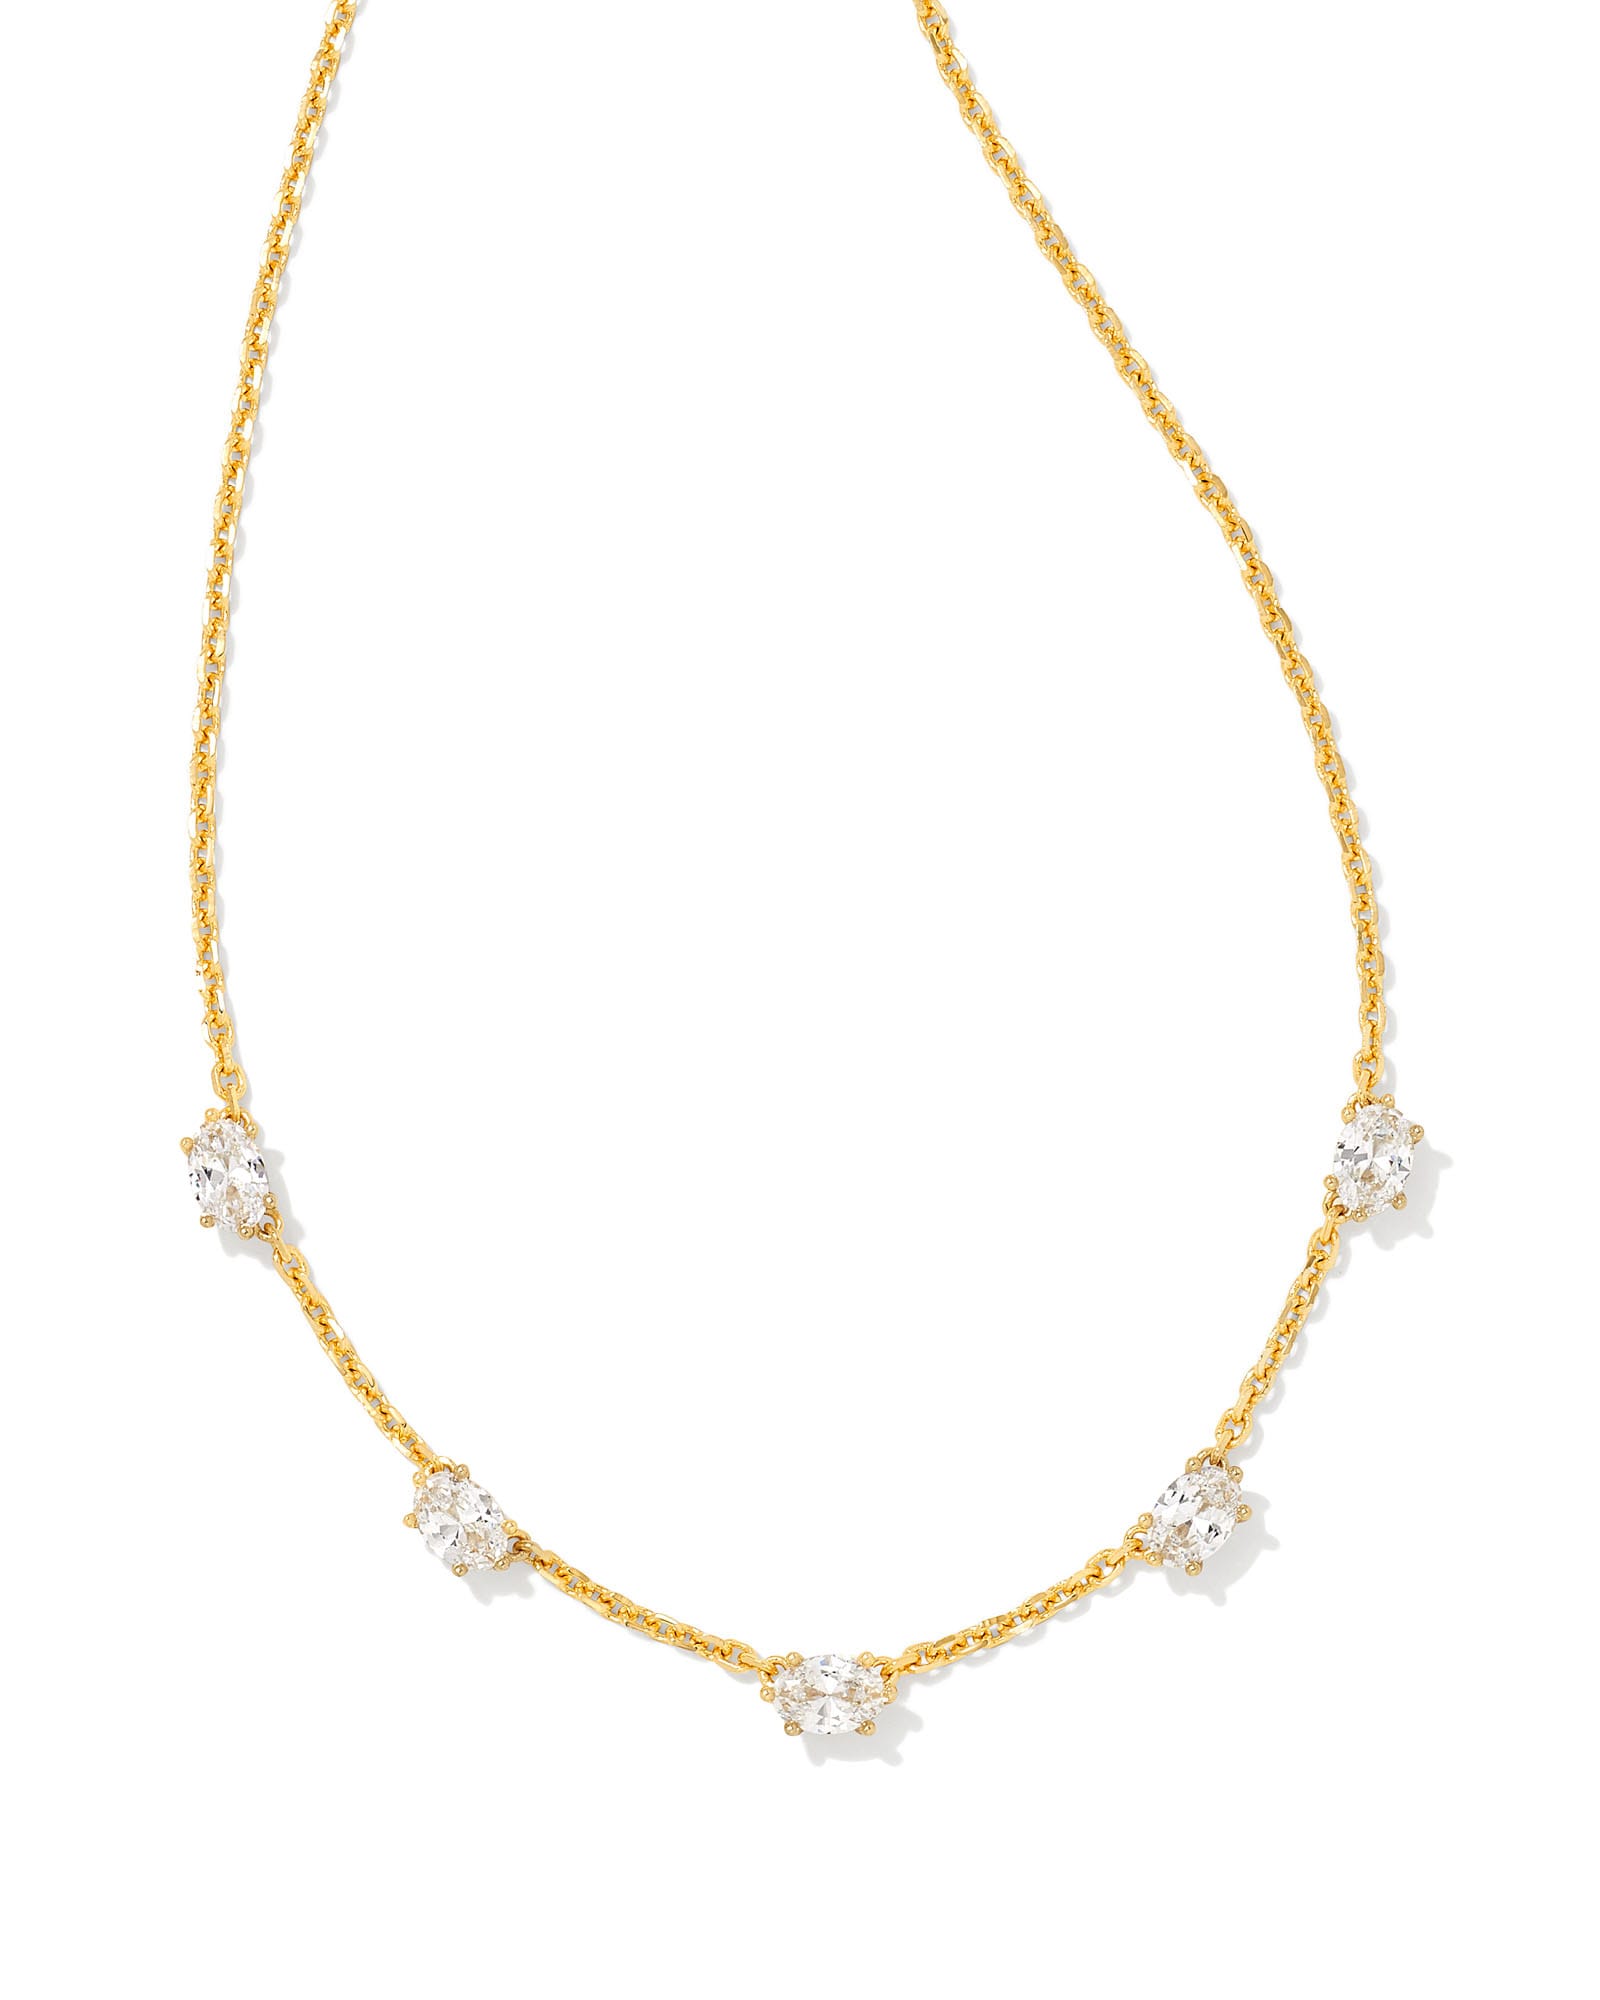 Kendra Scott Cailin Gold Crystal Strand Necklace in White Crystal | 14K Yellow Gold